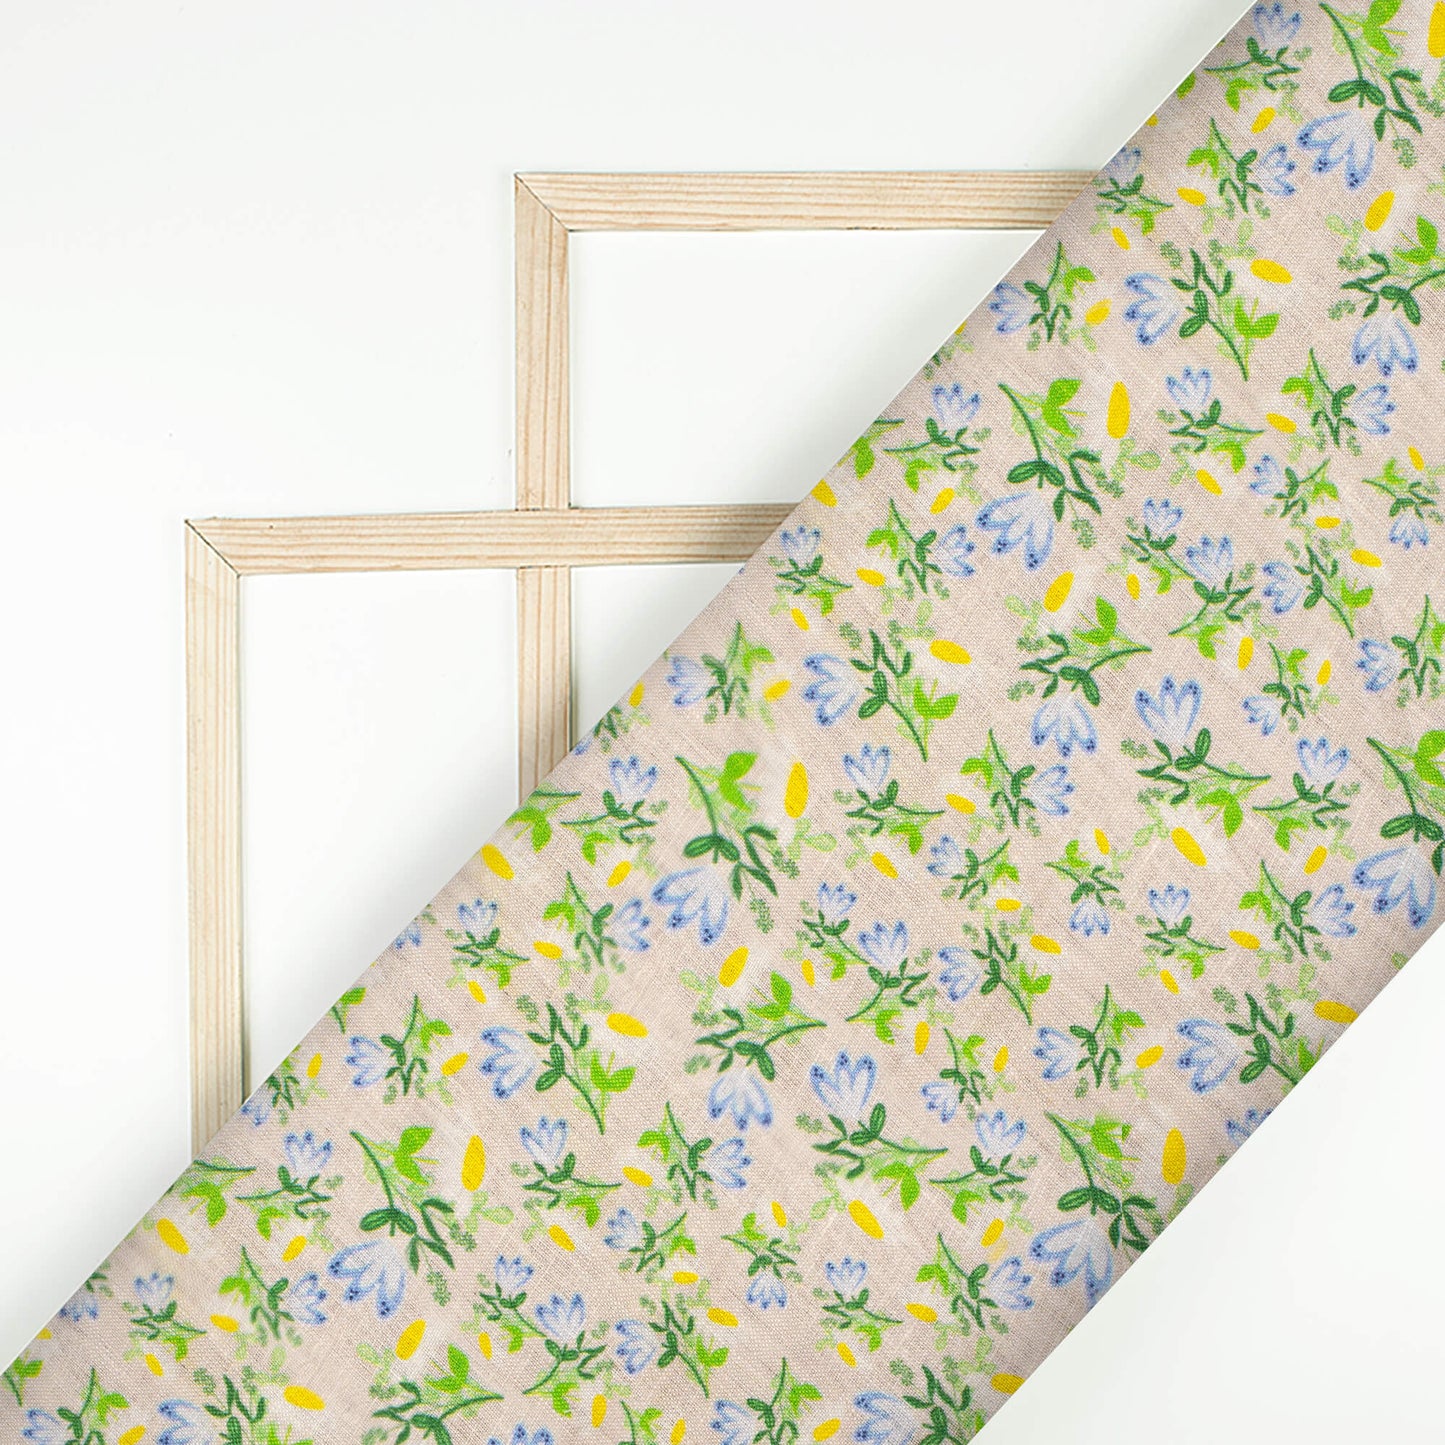 Cloudy Grey And Kelly Green Floral Pattern Digital Print Premium Swiss Linen Fabric